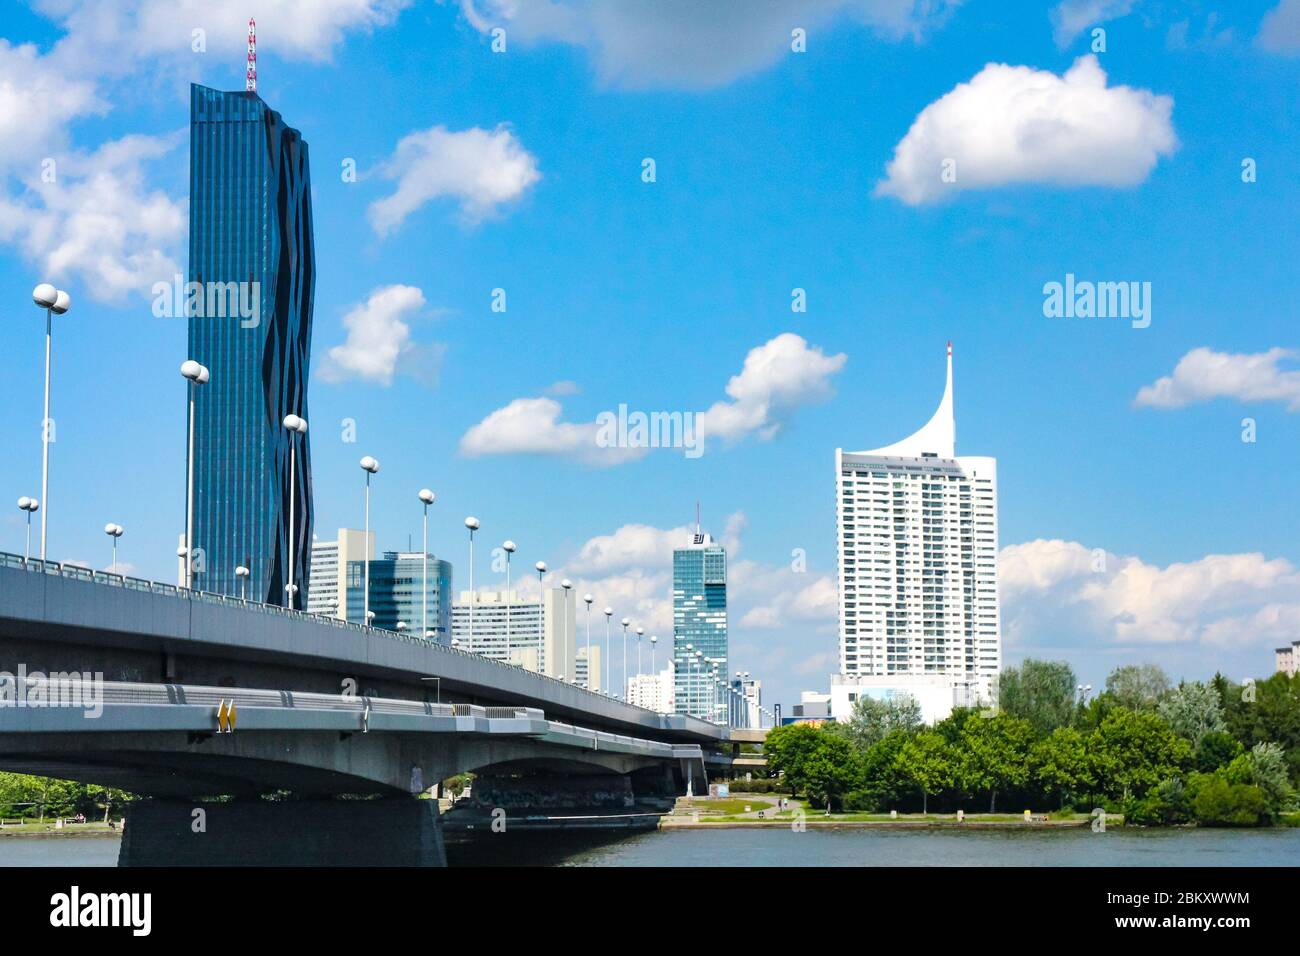 View of Reichsbrücke Bridge and skyscrapers on Donauinsel (Danube Island), an artificial island of the Danube river in Vienna, capital of Austria. Stock Photo